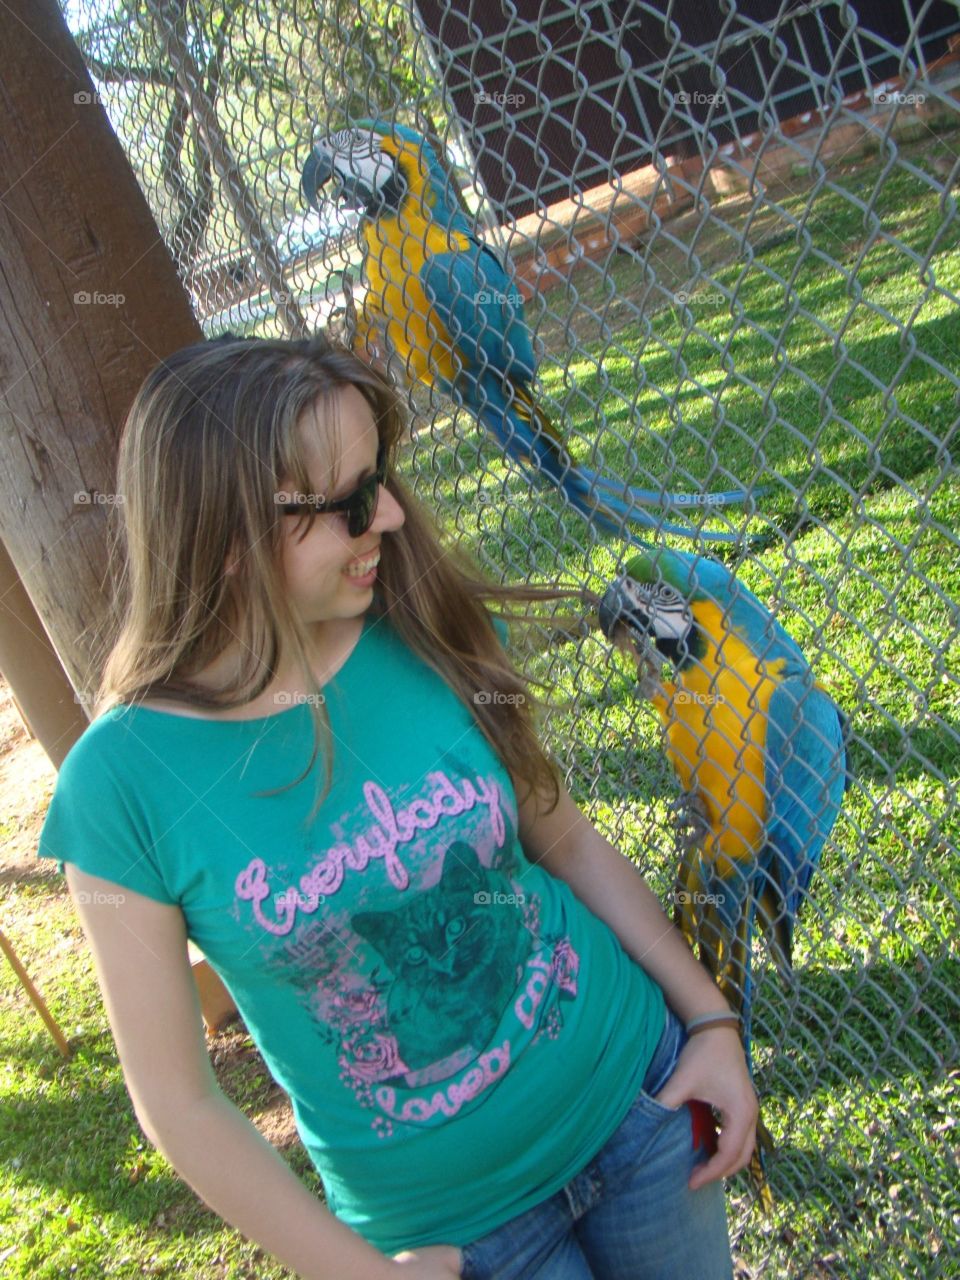 The best hairstylist - a blue-and-yellow macaw